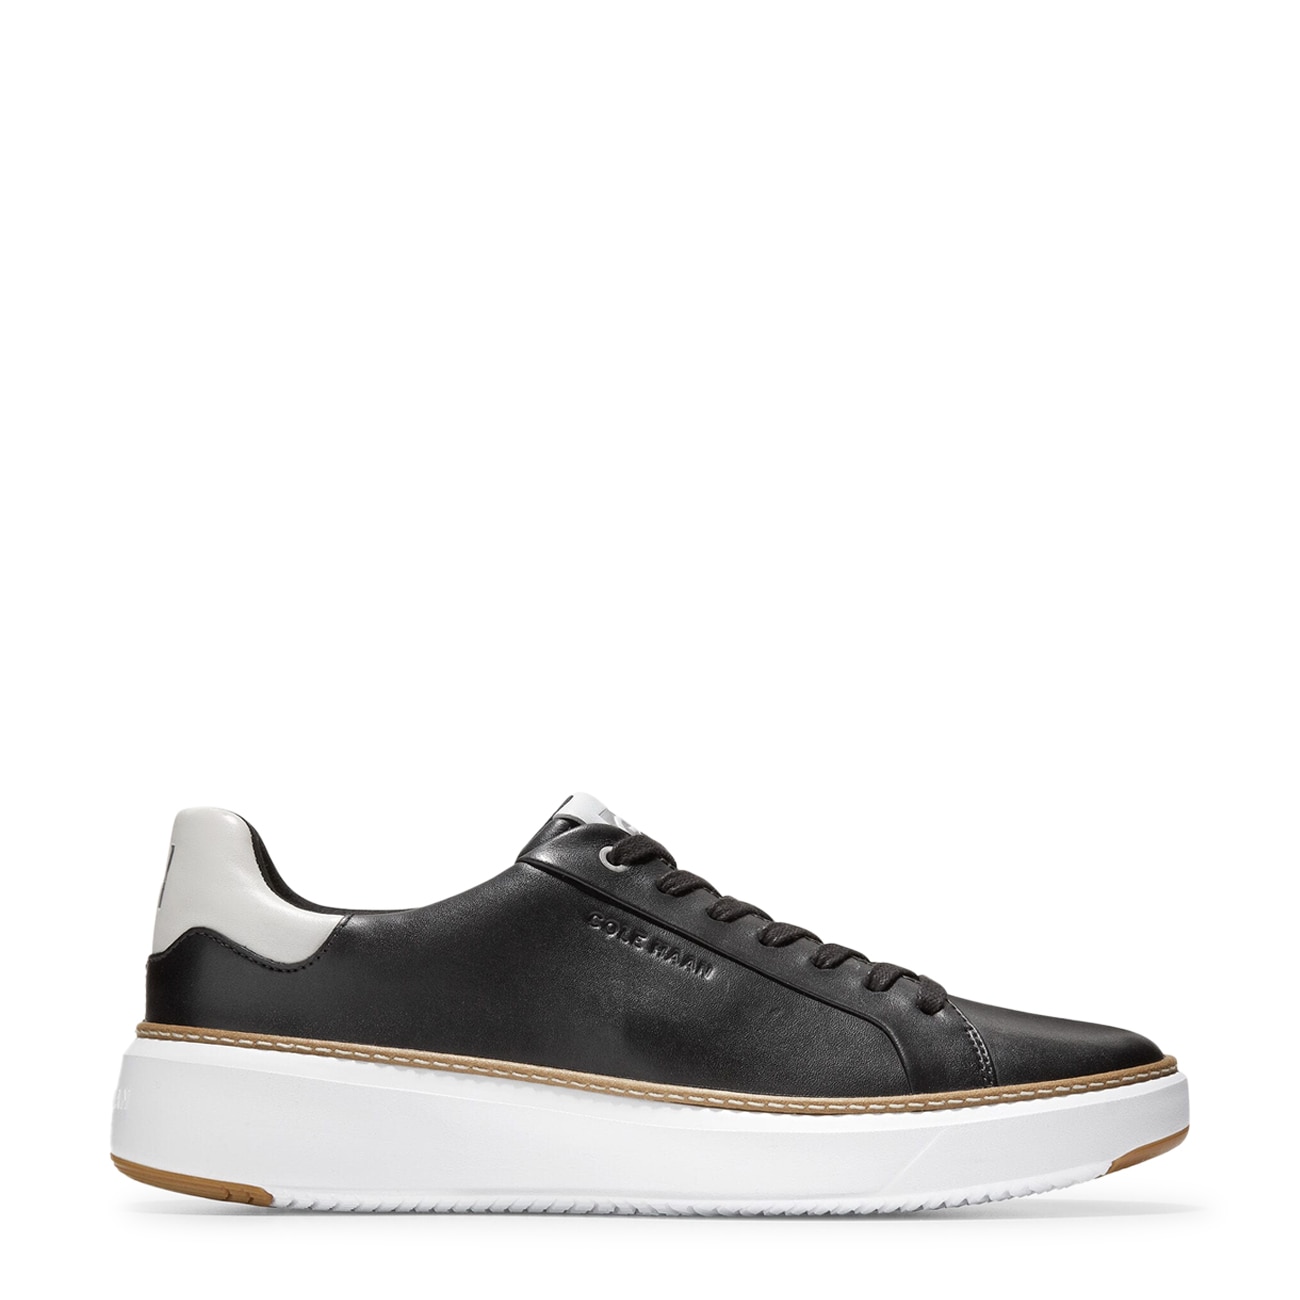 Cole Haan Men's GrandPro Topspin Sneaker | The Shoe Company